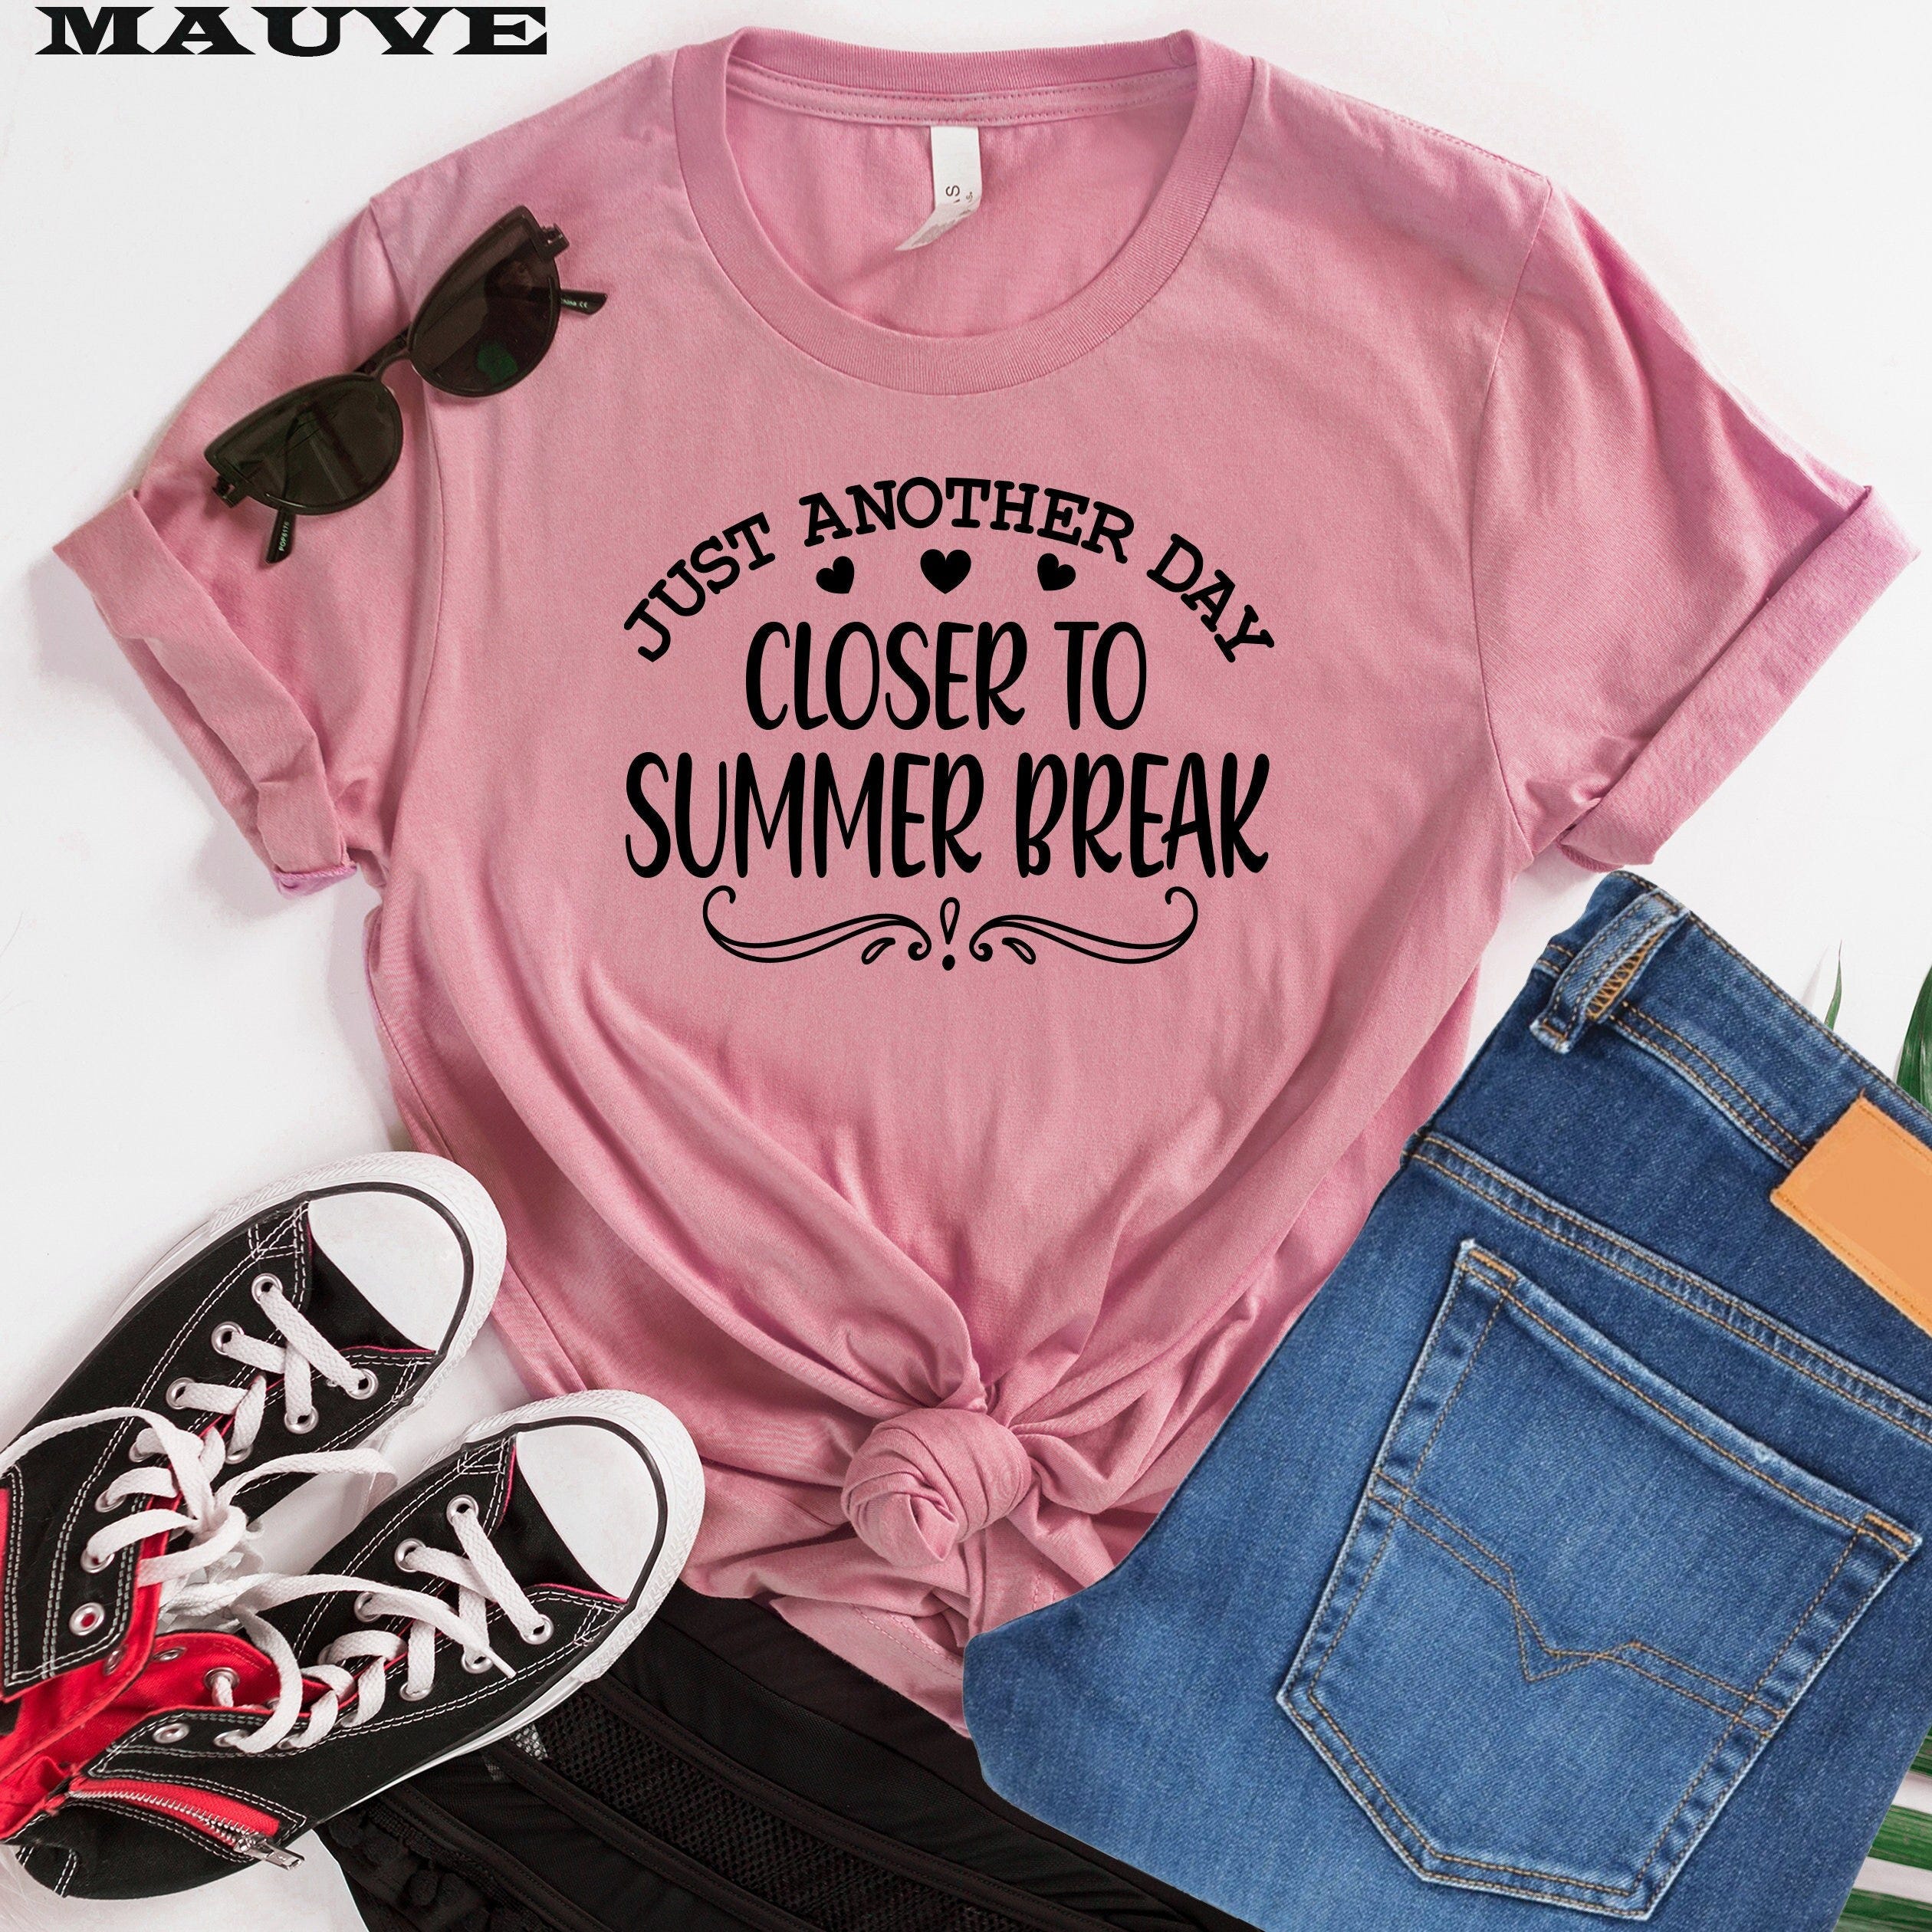 Just Another Day Closer To Summer Break Shirt, Teacher Shirt, Summer Shirt, Beach Vibes Shirt, Teacher Clothing, End School Year Last Day